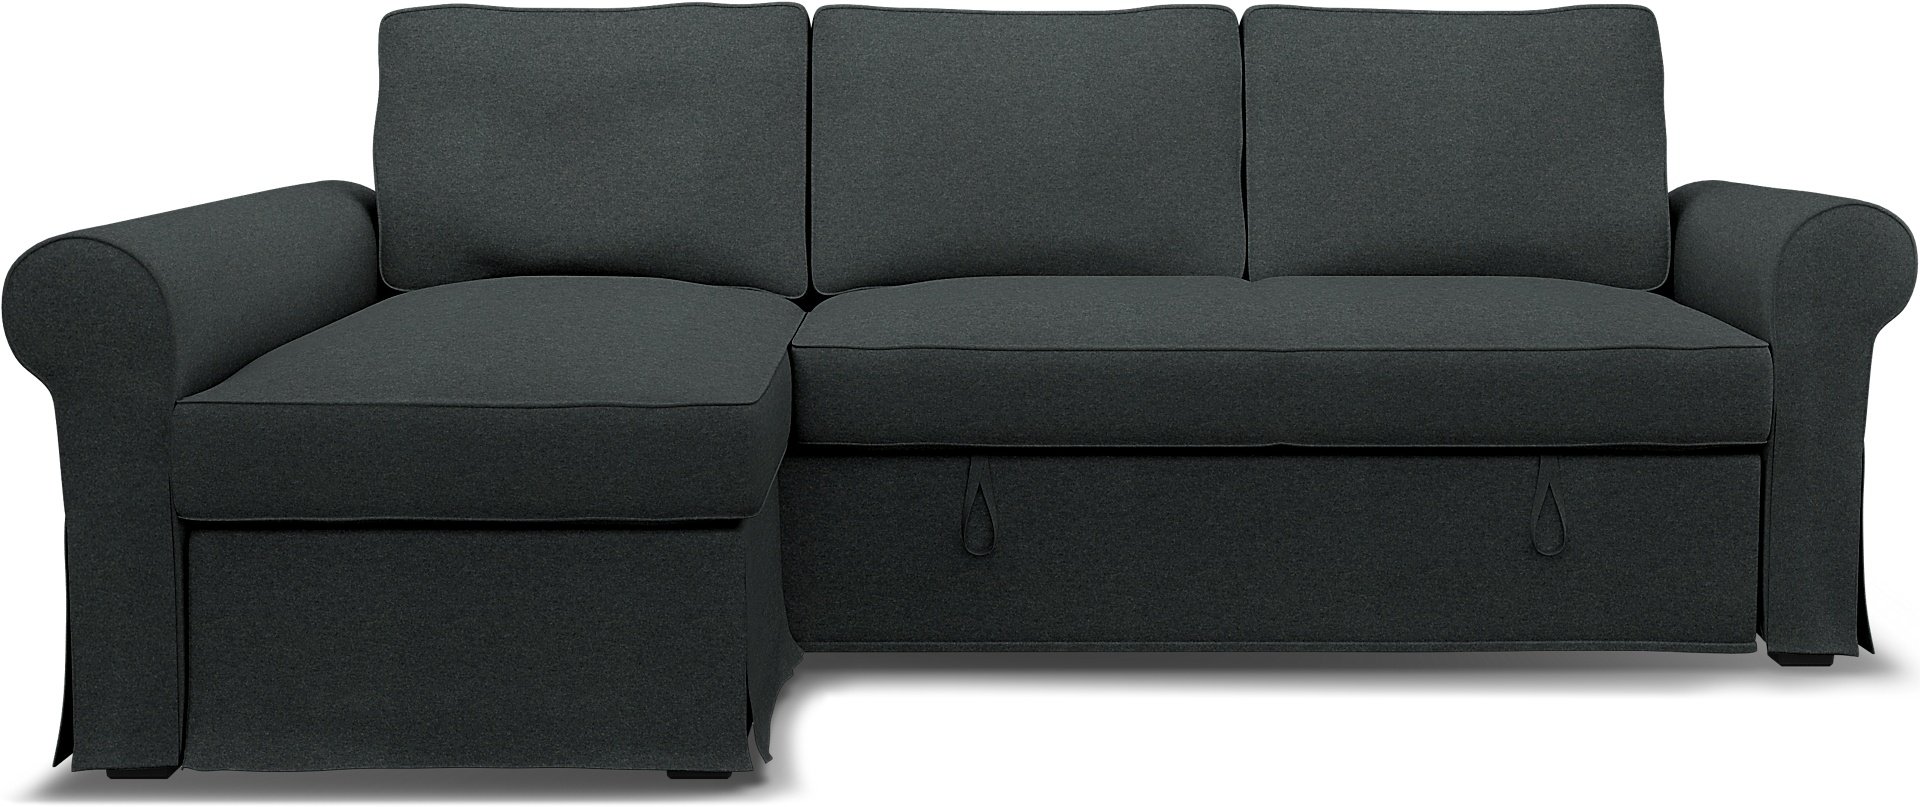 IKEA - Backabro Sofabed with Chaise Cover, Stone, Wool - Bemz